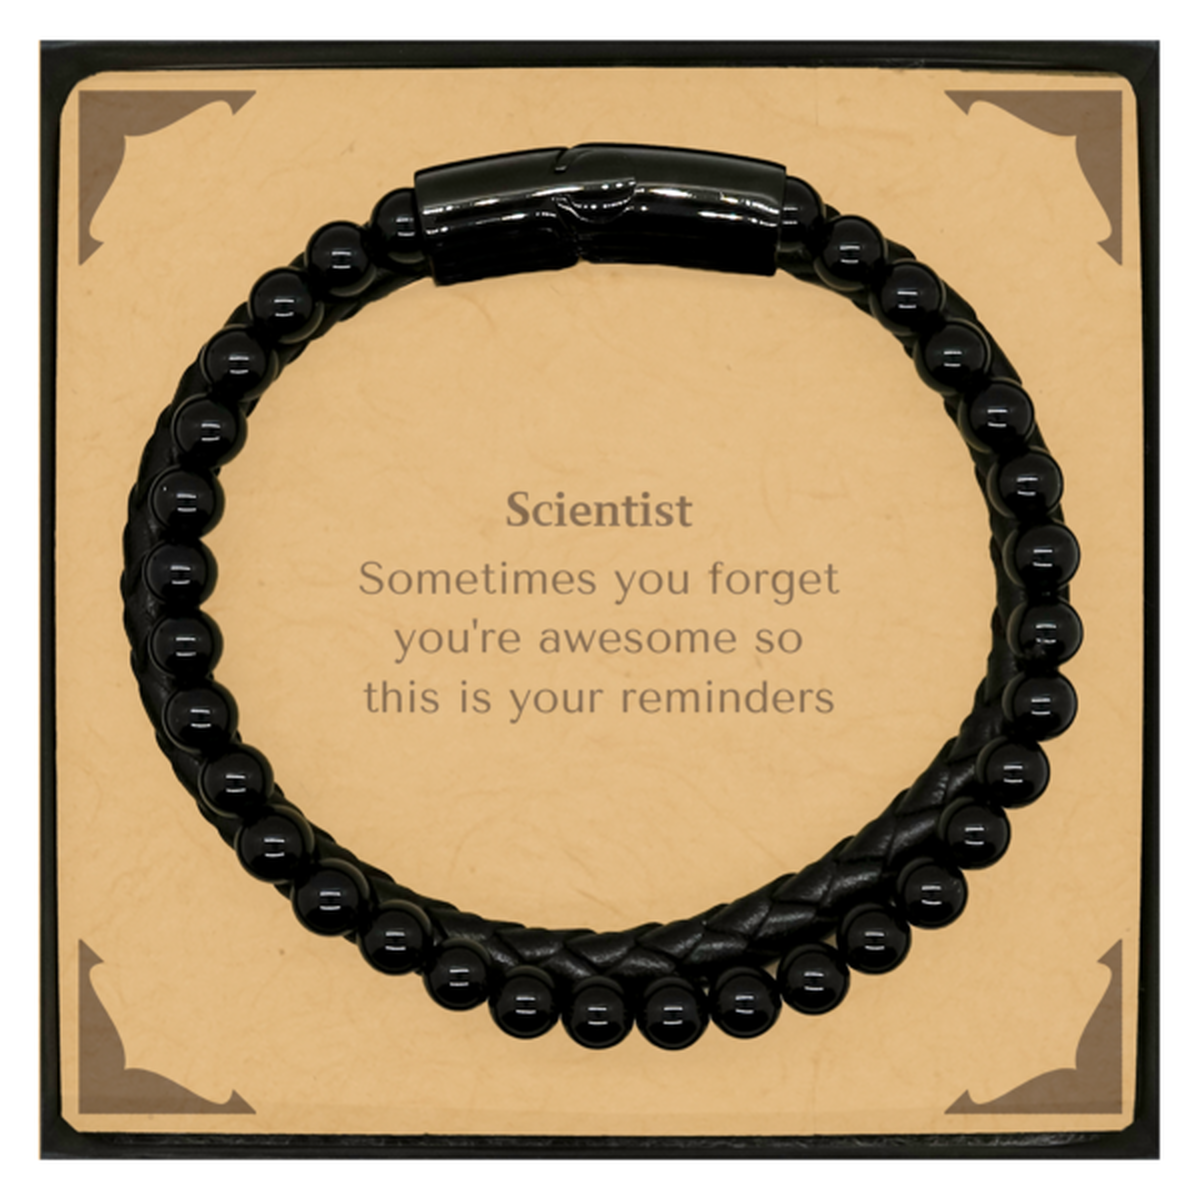 Sentimental Scientist Stone Leather Bracelets, Scientist Sometimes you forget you're awesome so this is your reminders, Graduation Christmas Birthday Gifts for Scientist, Men, Women, Coworkers